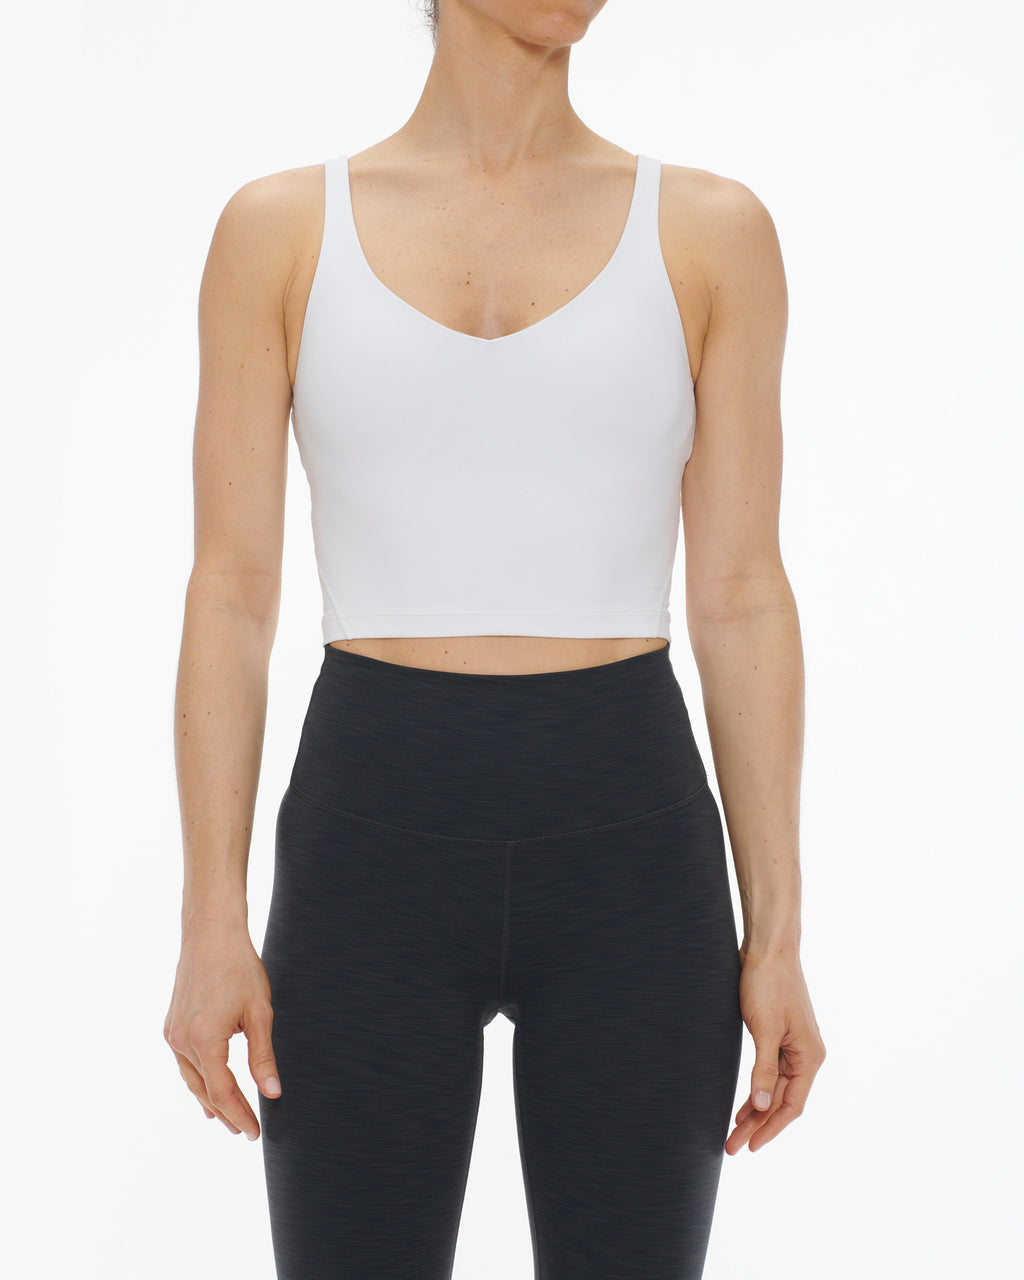 Lululemon Align Tank Pink Size 10 - $43 (28% Off Retail) New With Tags -  From Ashley